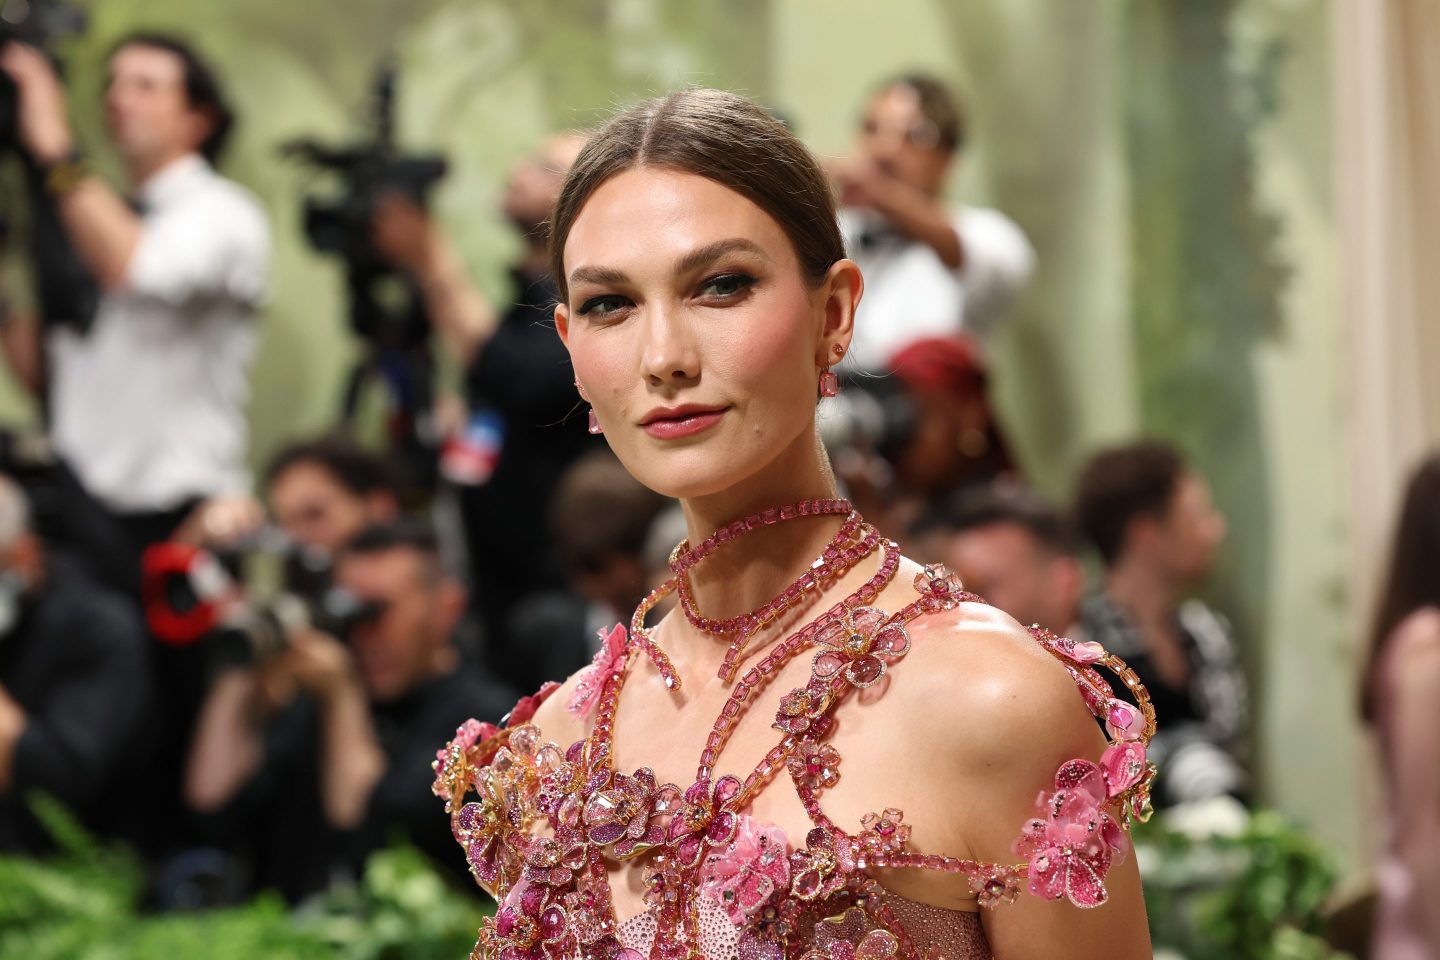 Closeup image of model Karlie Kloss in ball gown